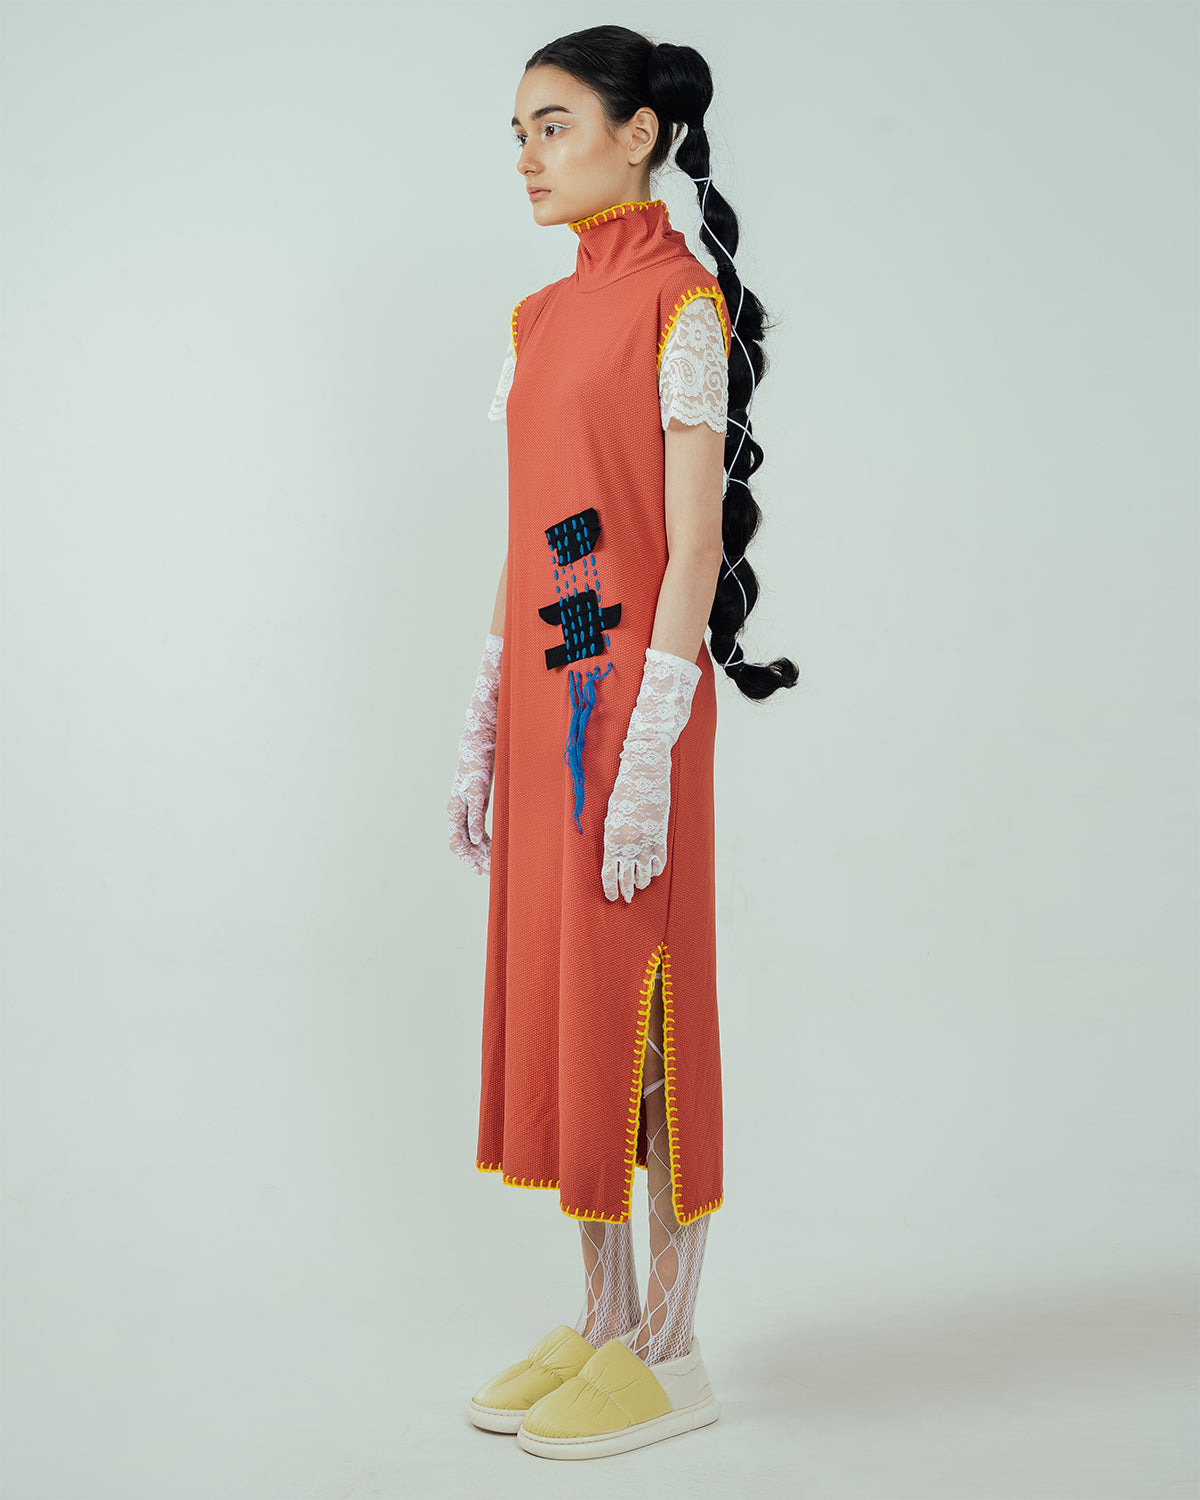 ​Pitchy Stitchy Slit Dress Red Wood - High On Life